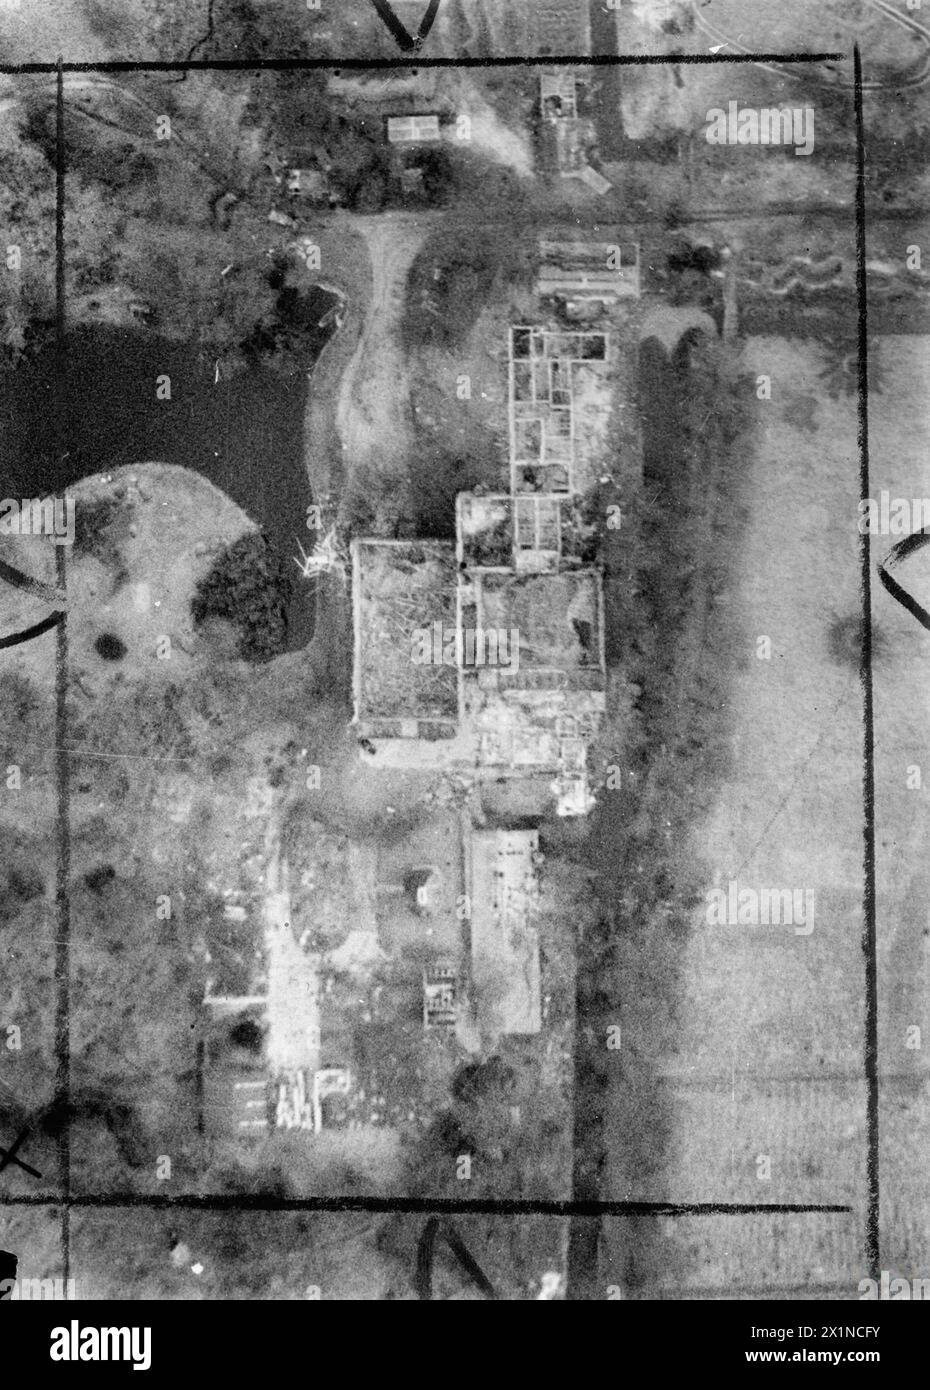 ROYAL AIR FORCE: OPERATIONS BY THE PHOTOGRAPHIC RECONNAISSANCE UNITS, 1939-1945. - Part of a vertical photographic-reconnaissance aerial, showing buildings of former film studios in Haagsche Bosch, Holland, which were being used to fire V2 rockets, following their destruction by Supermarine Spitfire fighter-bombers of Fighter Command, Royal Air Force, 106 Group Stock Photo